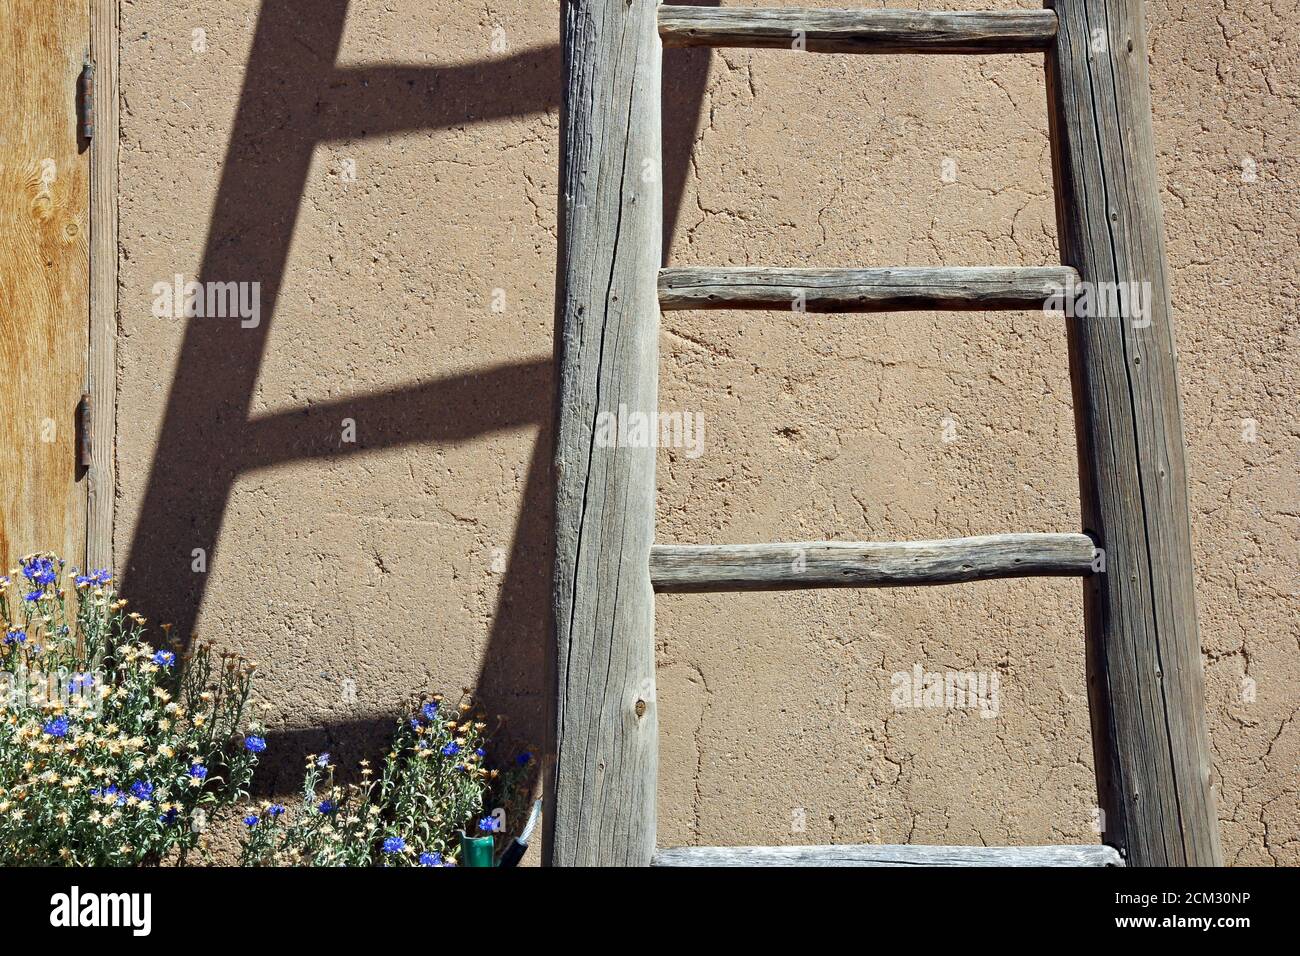 An old, wooden ladder and its shadow. Stock Photo